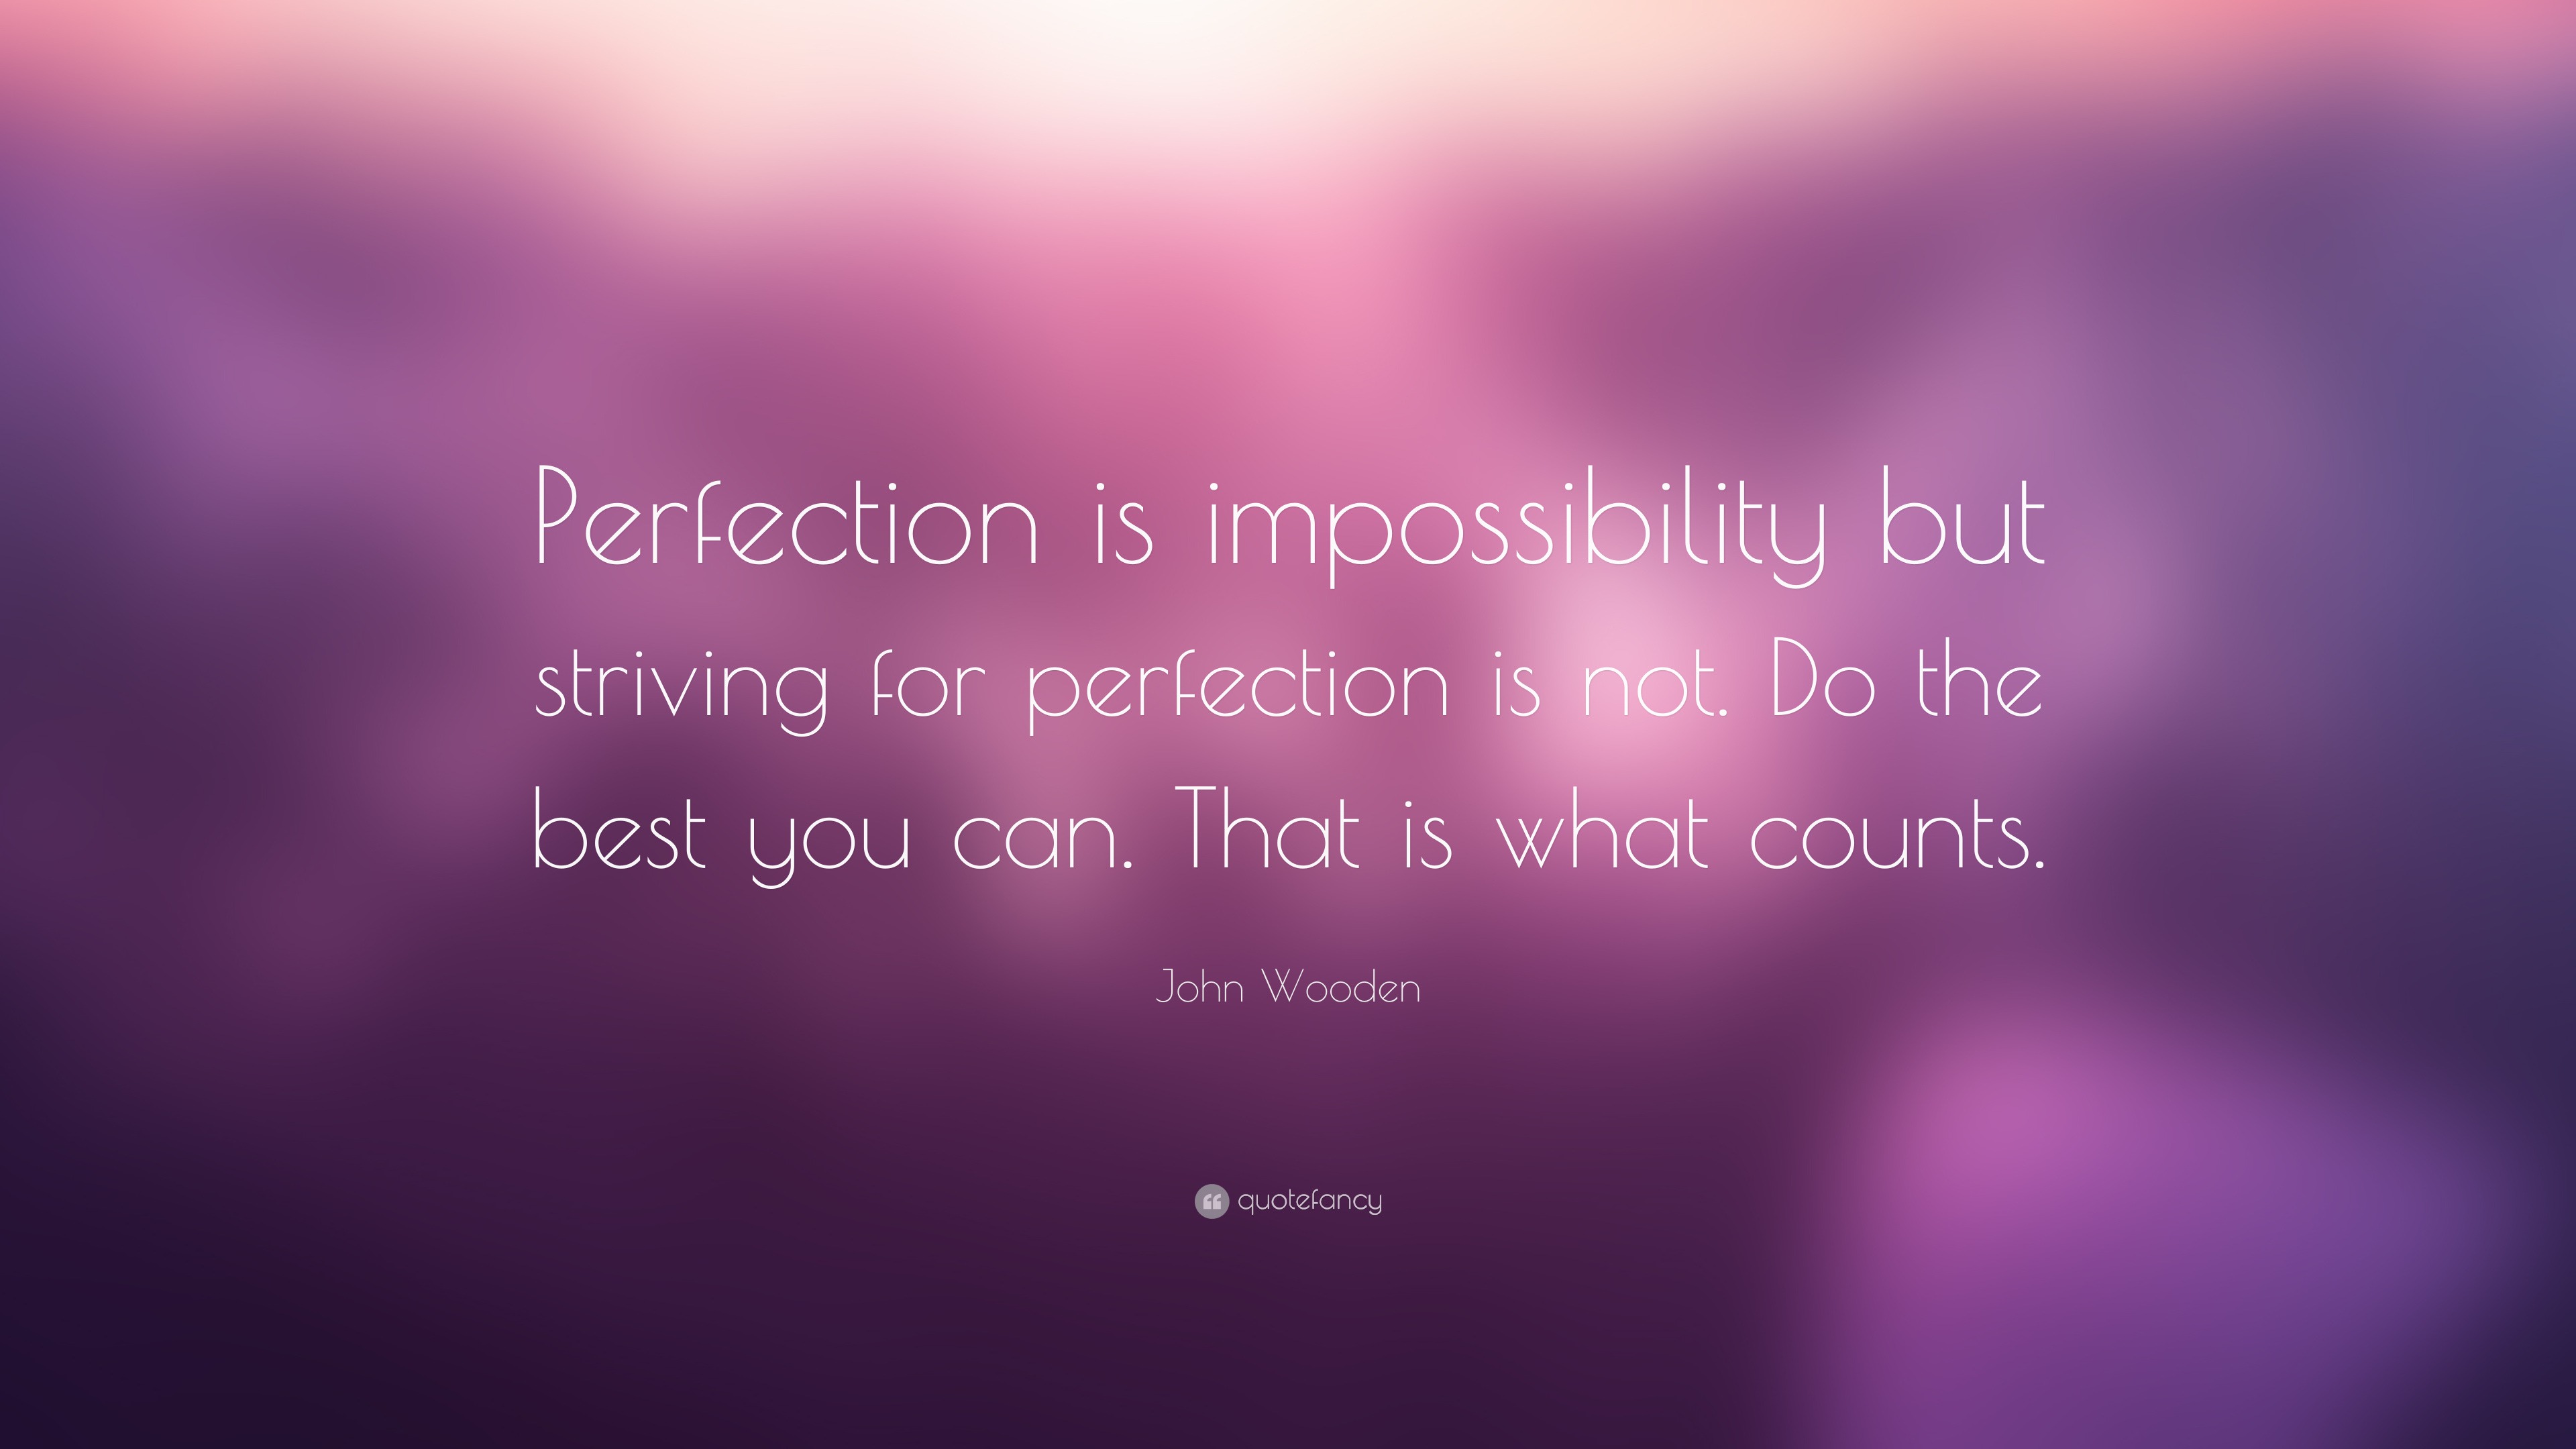 John Wooden Quote: “Perfection is impossibility but striving for